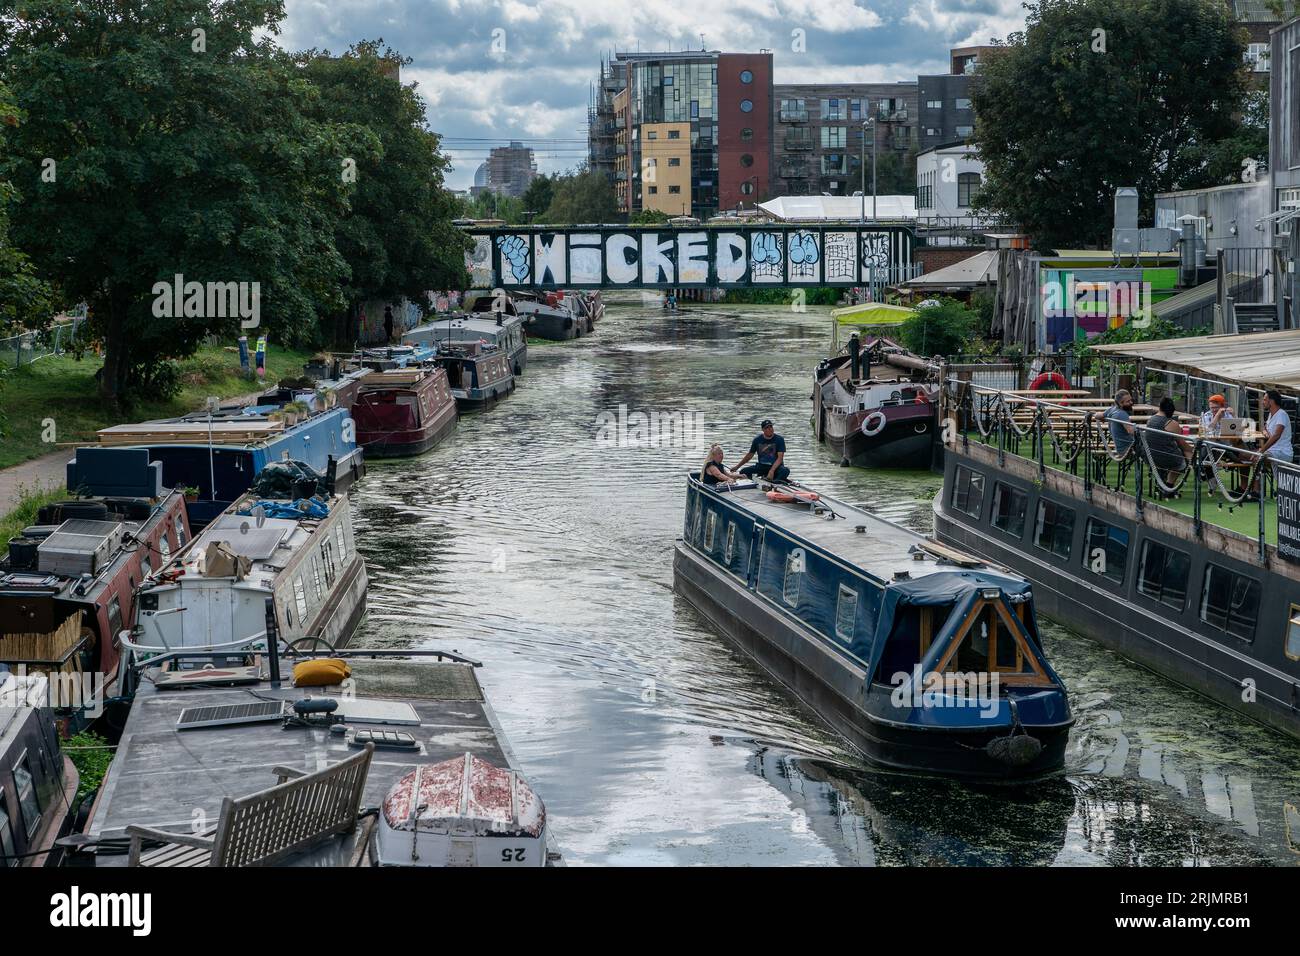 People enjoying the hot weather on the River Lea in Hackney, London. Stock Photo